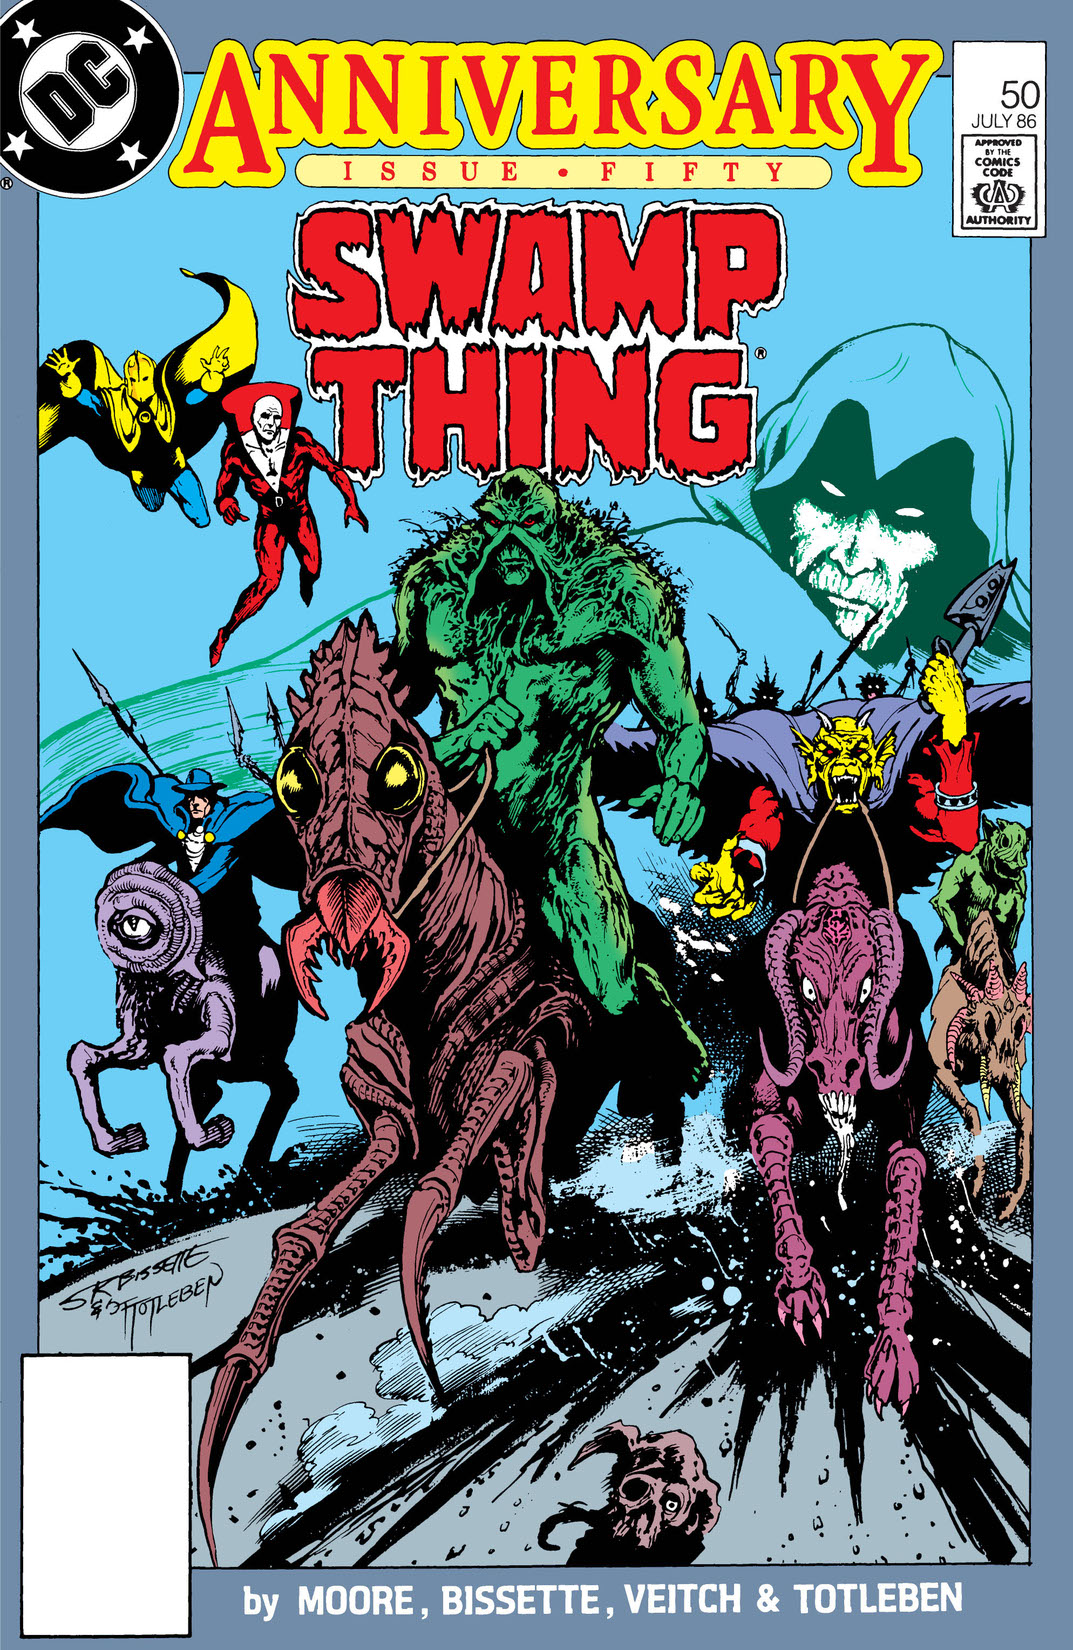 Swamp Thing (1985-) #50 preview images